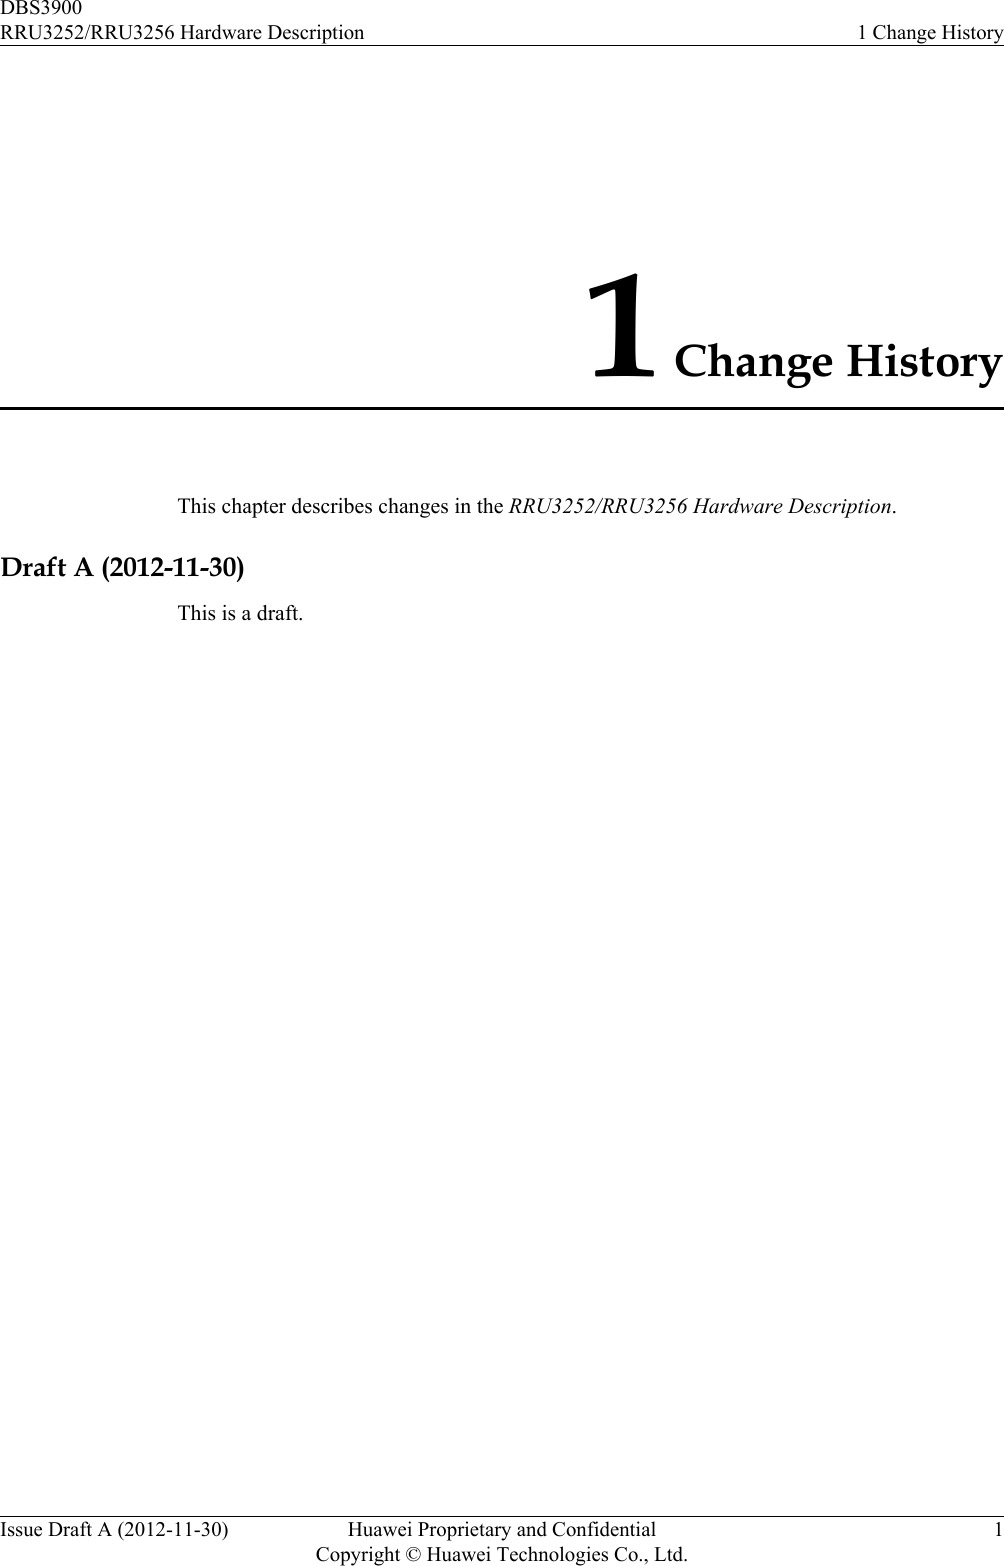 1 Change HistoryThis chapter describes changes in the RRU3252/RRU3256 Hardware Description.Draft A (2012-11-30)This is a draft.DBS3900RRU3252/RRU3256 Hardware Description 1 Change HistoryIssue Draft A (2012-11-30) Huawei Proprietary and ConfidentialCopyright © Huawei Technologies Co., Ltd.1